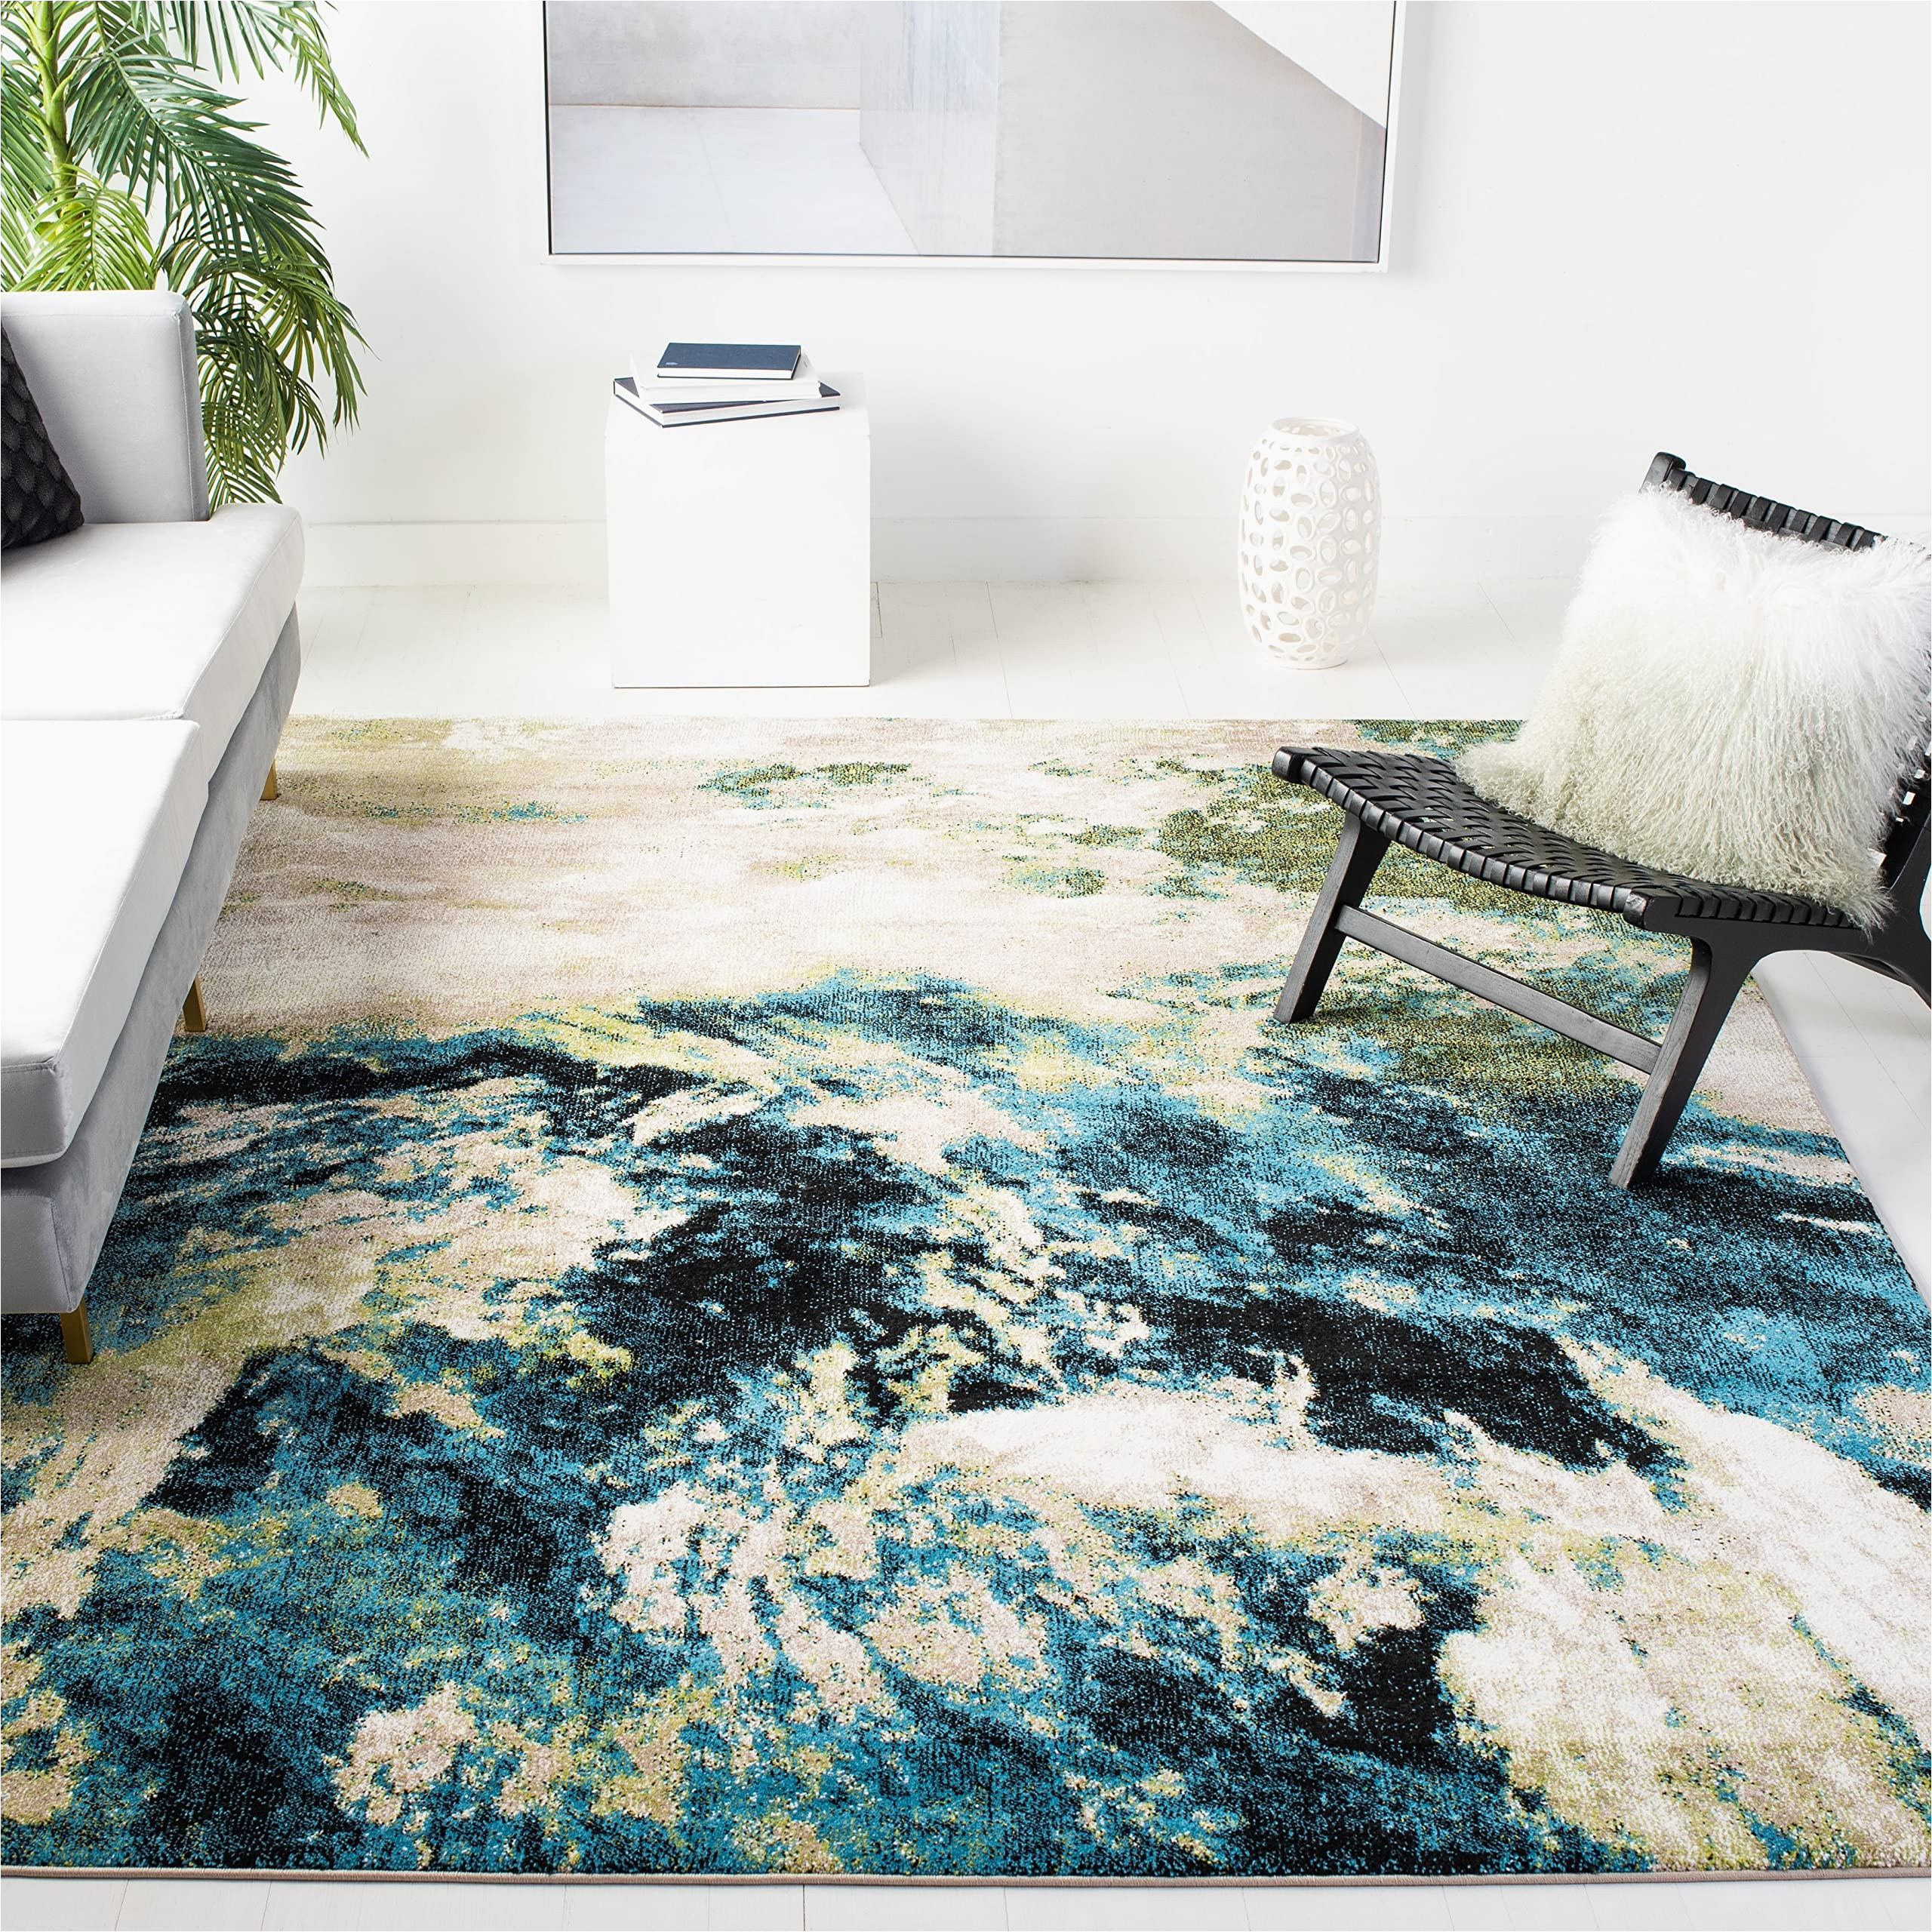 Large area Rugs 10 X 16 Safavieh Glacier Collection 8′ X 10′ Blue/multi Gla123b Modern Abstract Non-shedding Living Room Bedroom Dining Home Office area Rug